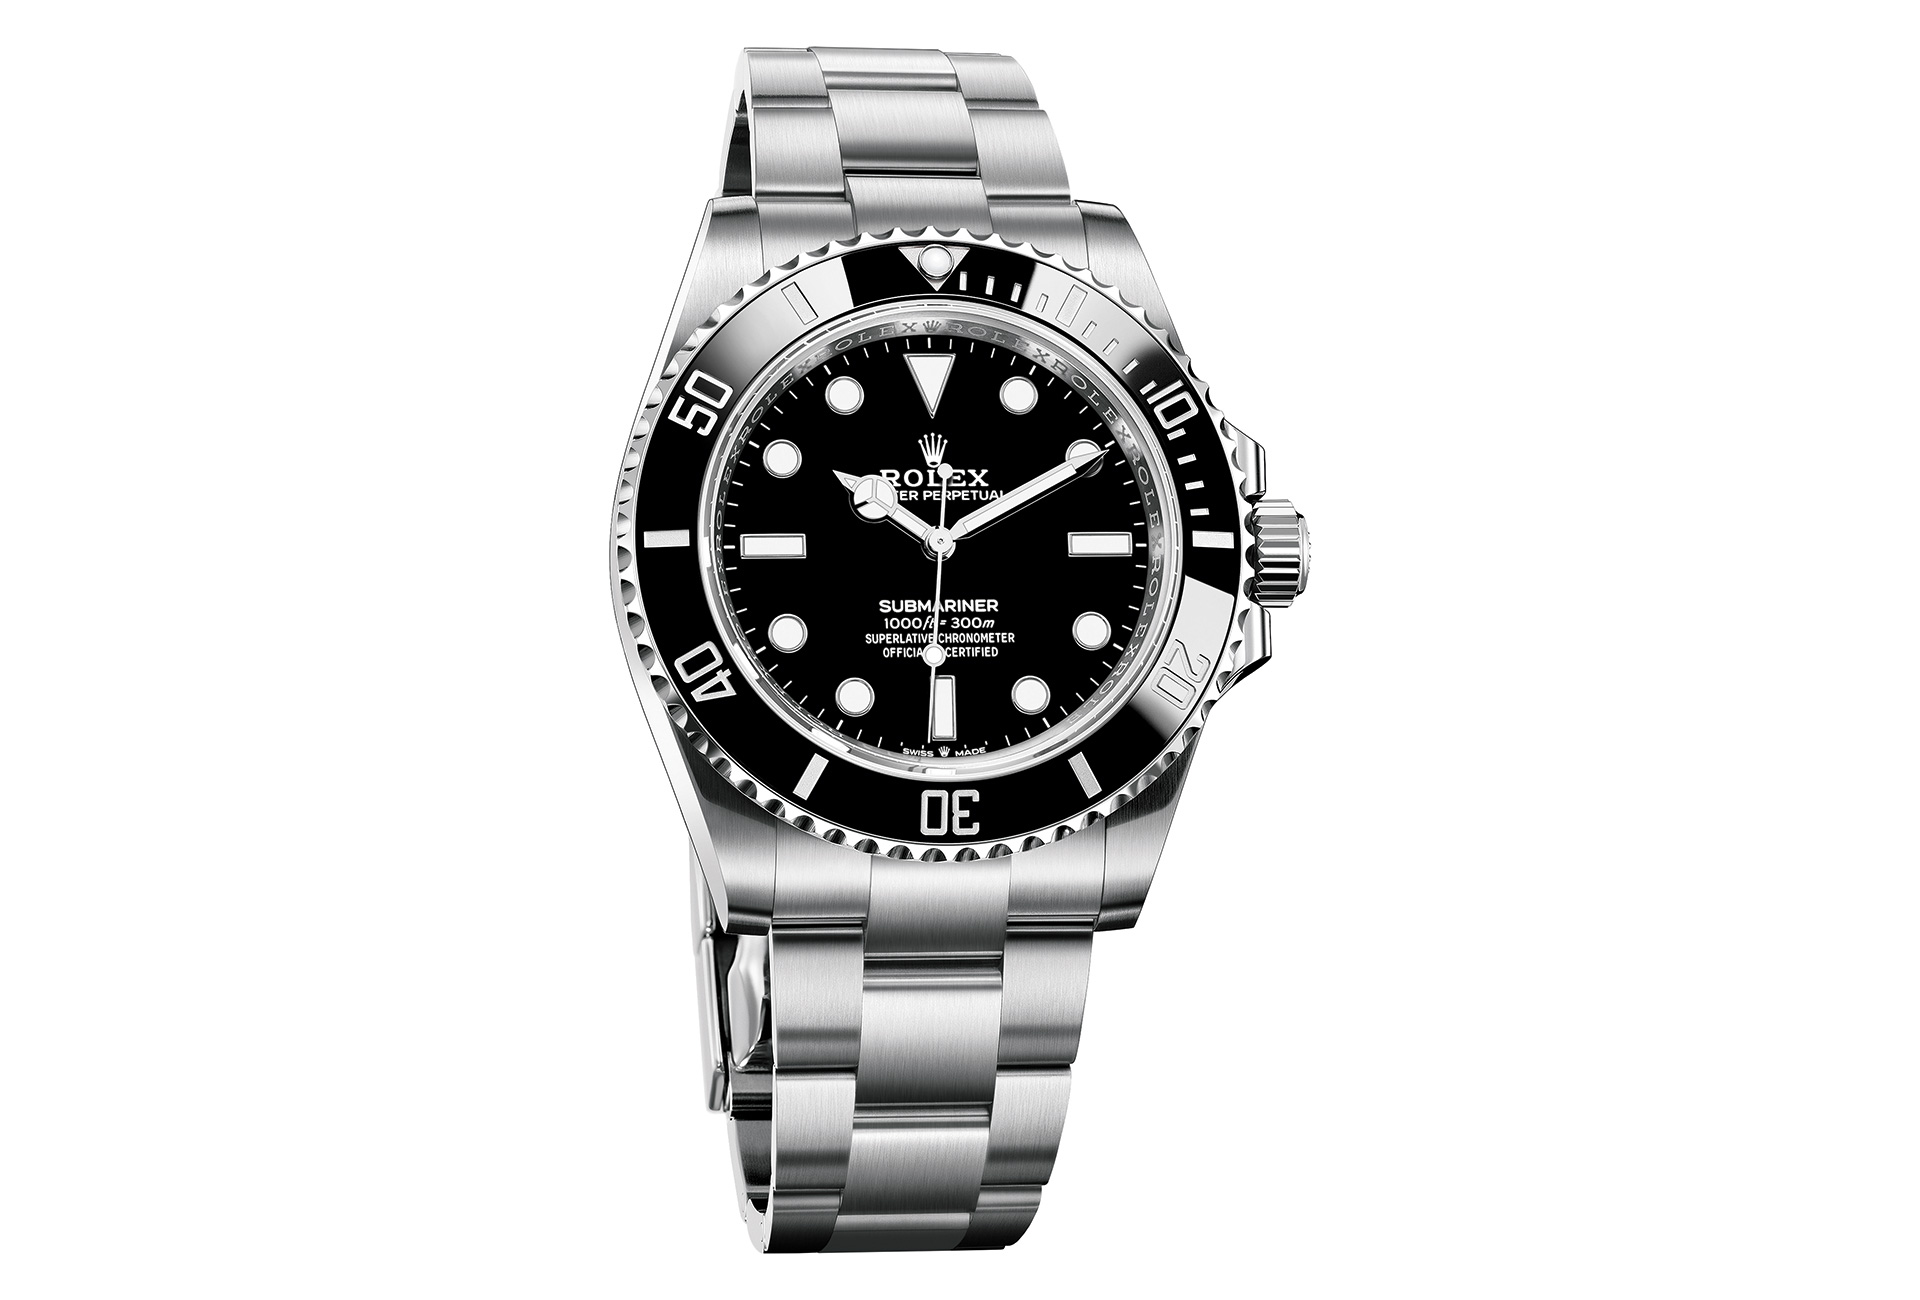 The new Rolex Submariner – FHH Journal